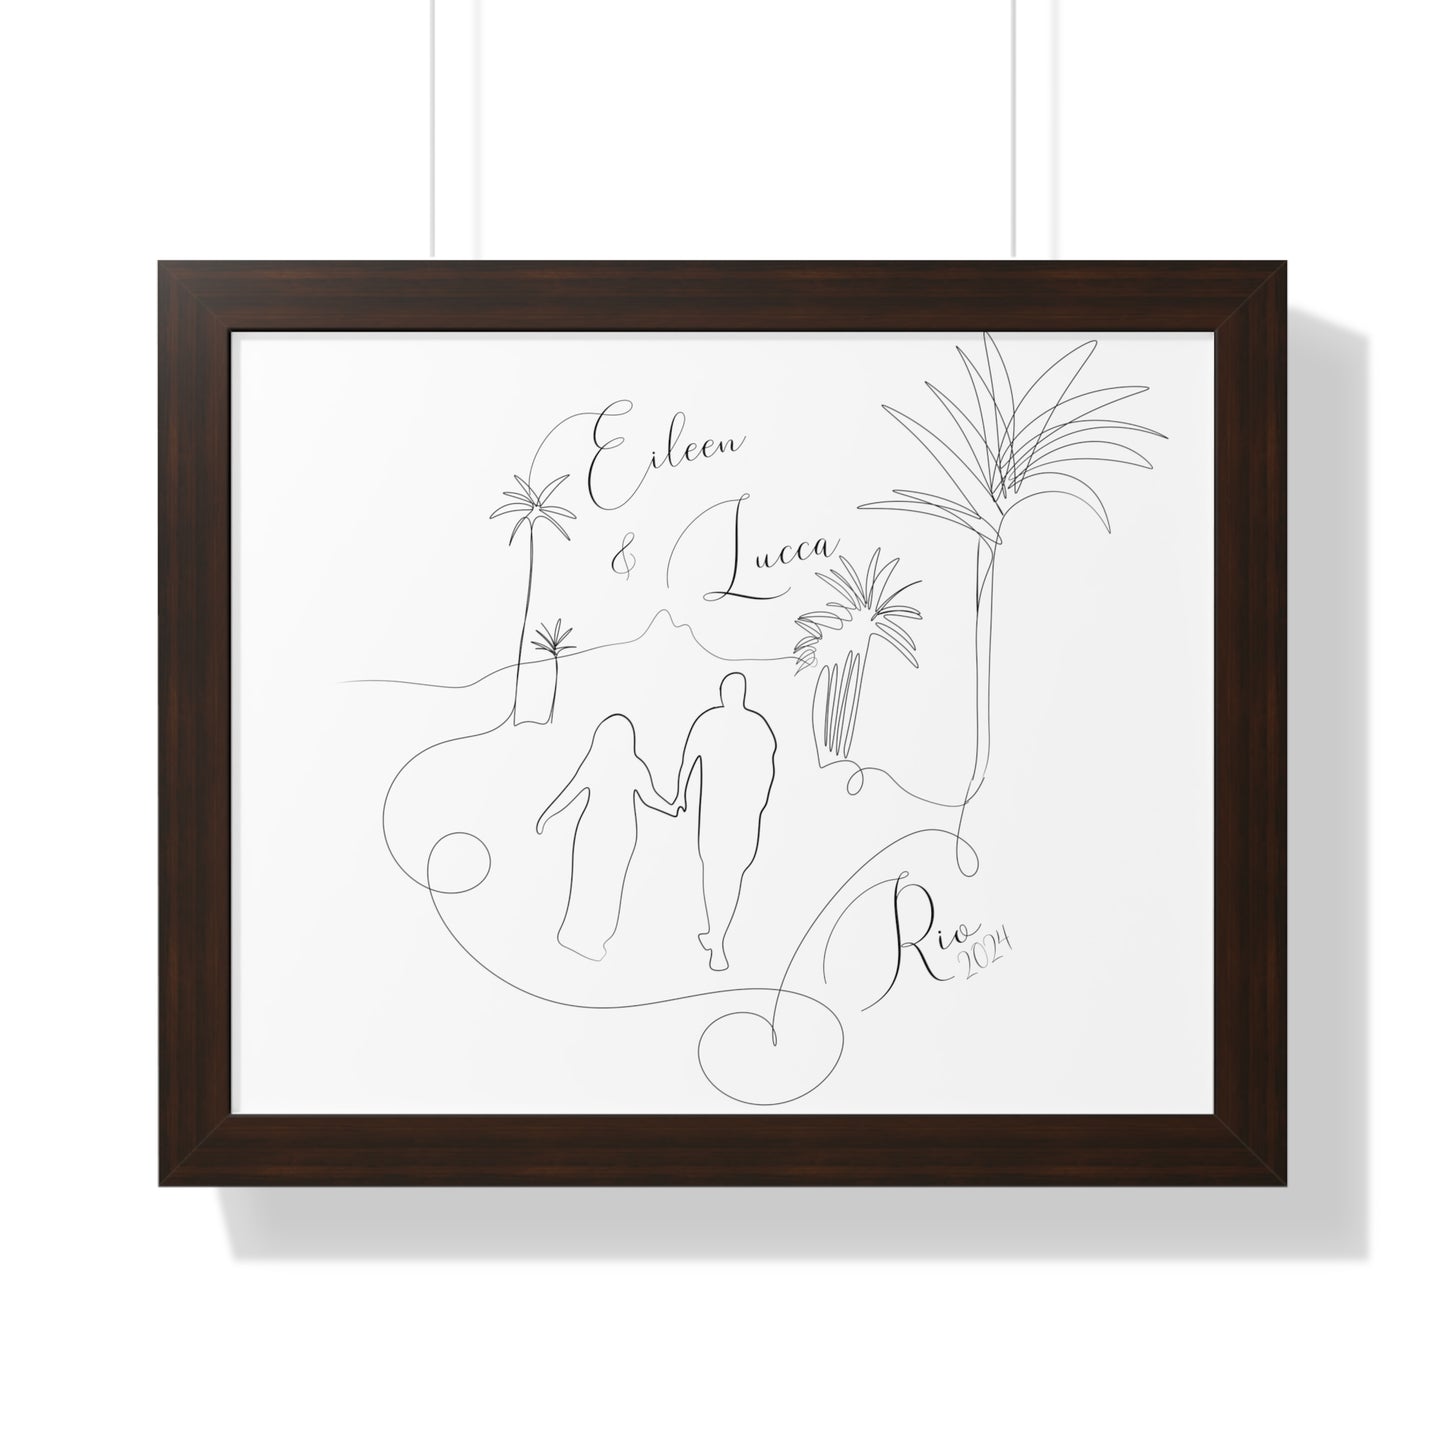 Personalize your Framed Wall Art